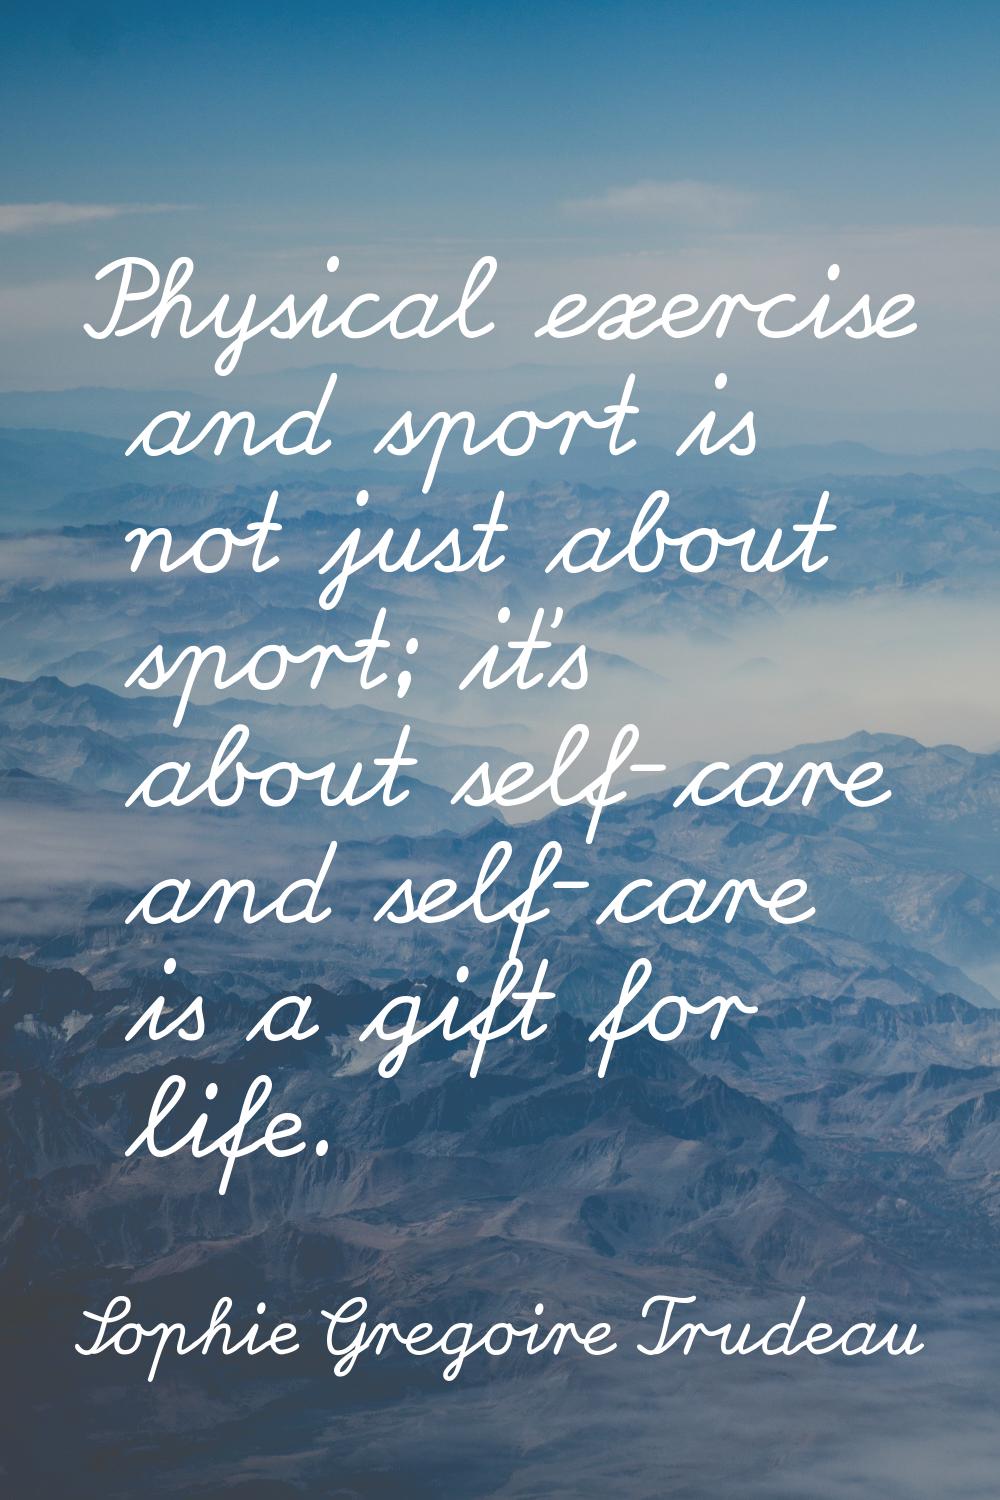 Physical exercise and sport is not just about sport; it's about self-care and self-care is a gift f